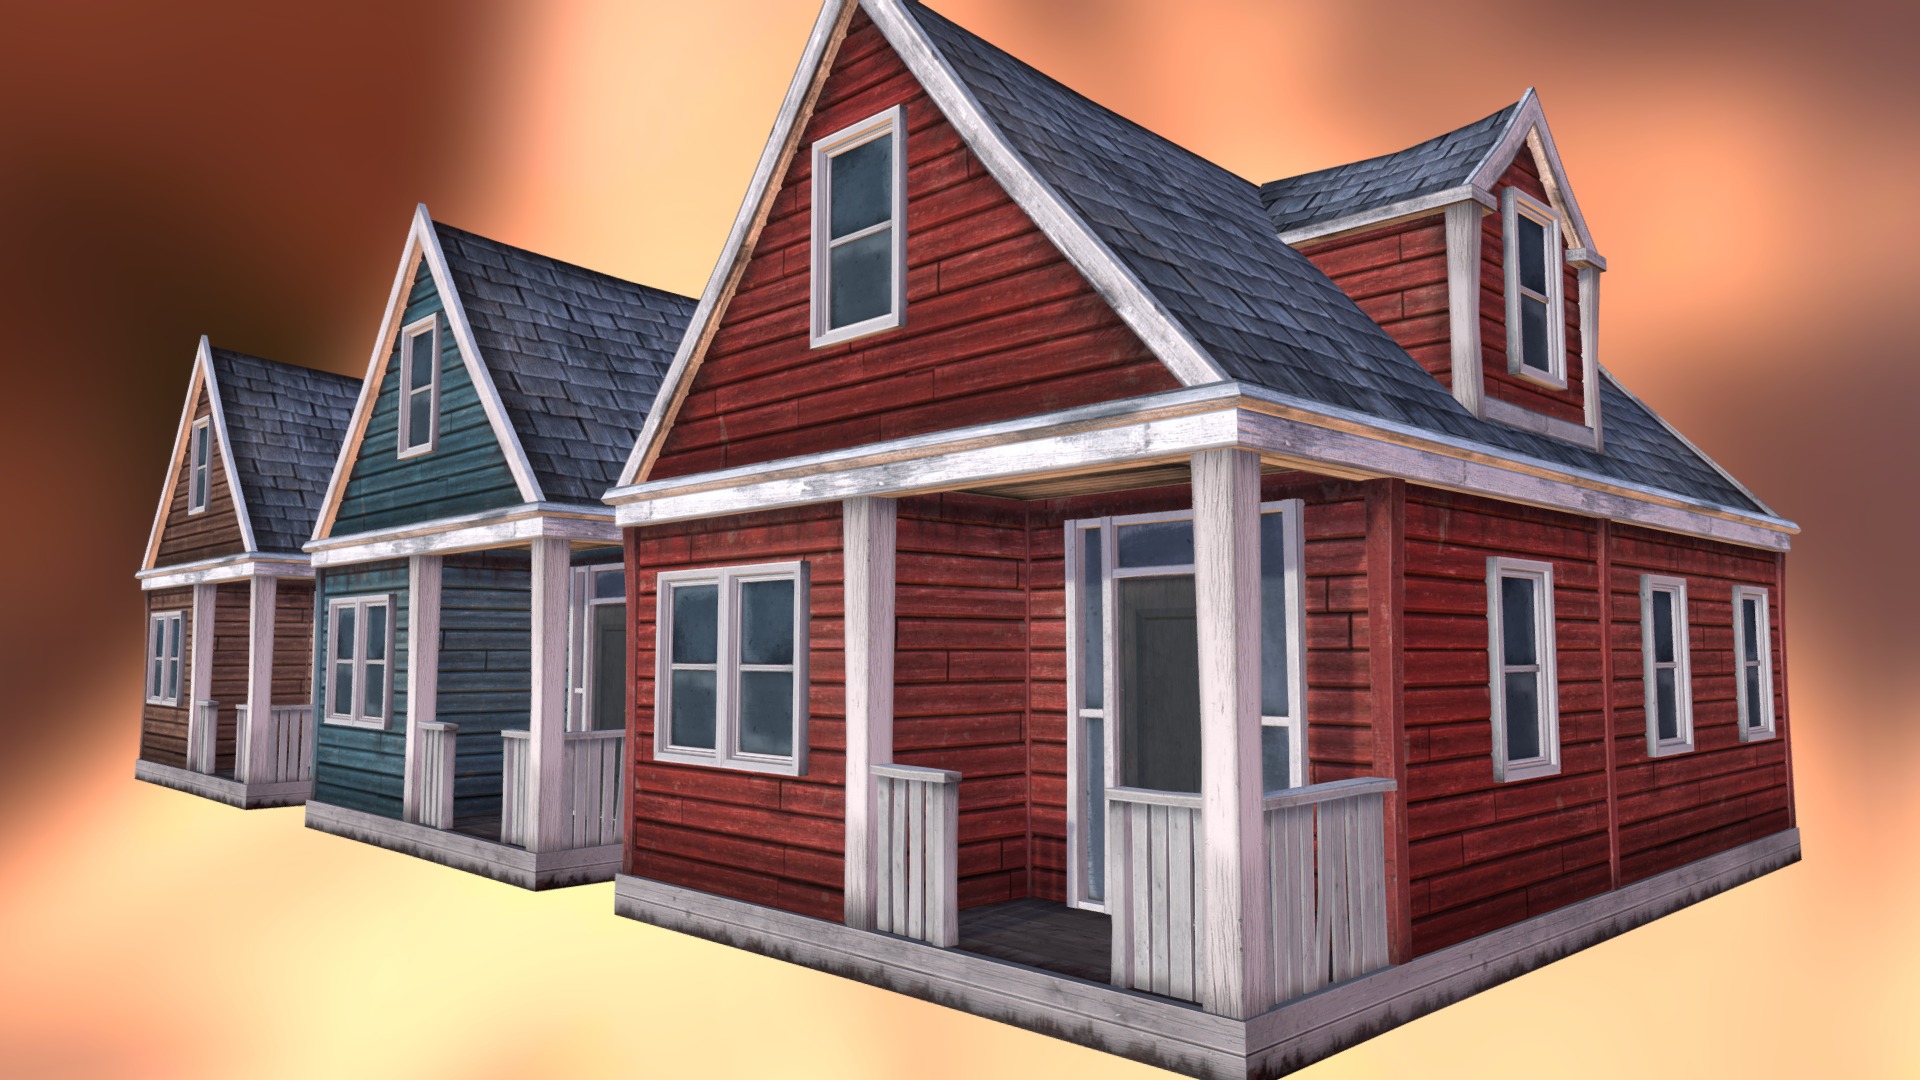 3D model Abandoned House 1 – Low Poly - This is a 3D model of the Abandoned House 1 - Low Poly. The 3D model is about a drawing of a house.